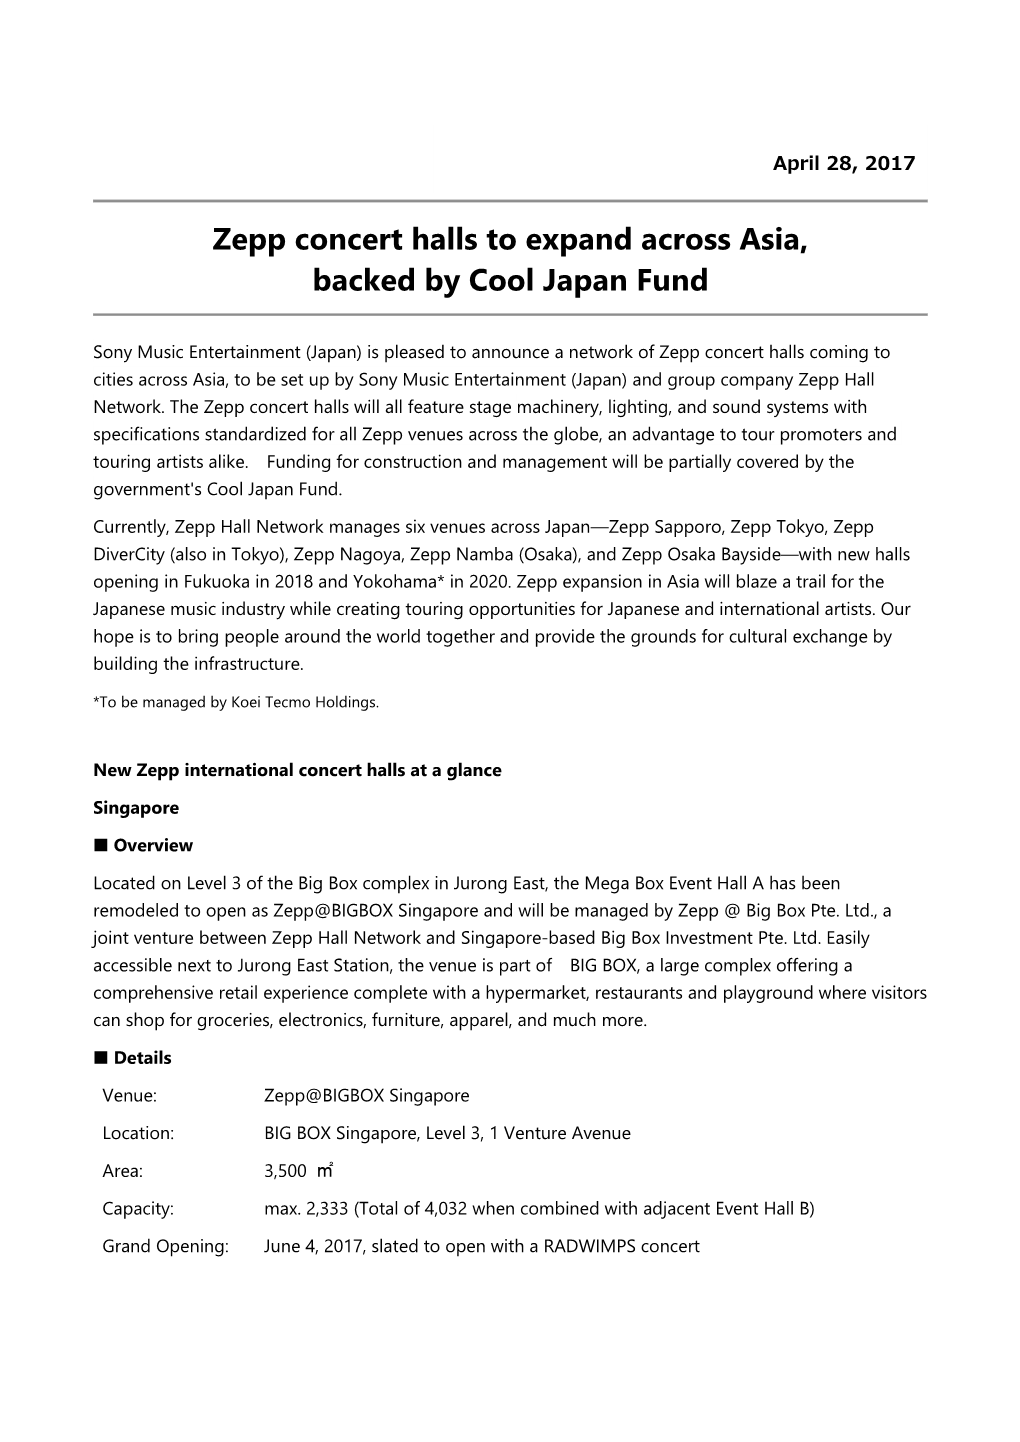 Zepp Concert Halls to Expand Across Asia, Backed by Cool Japan Fund